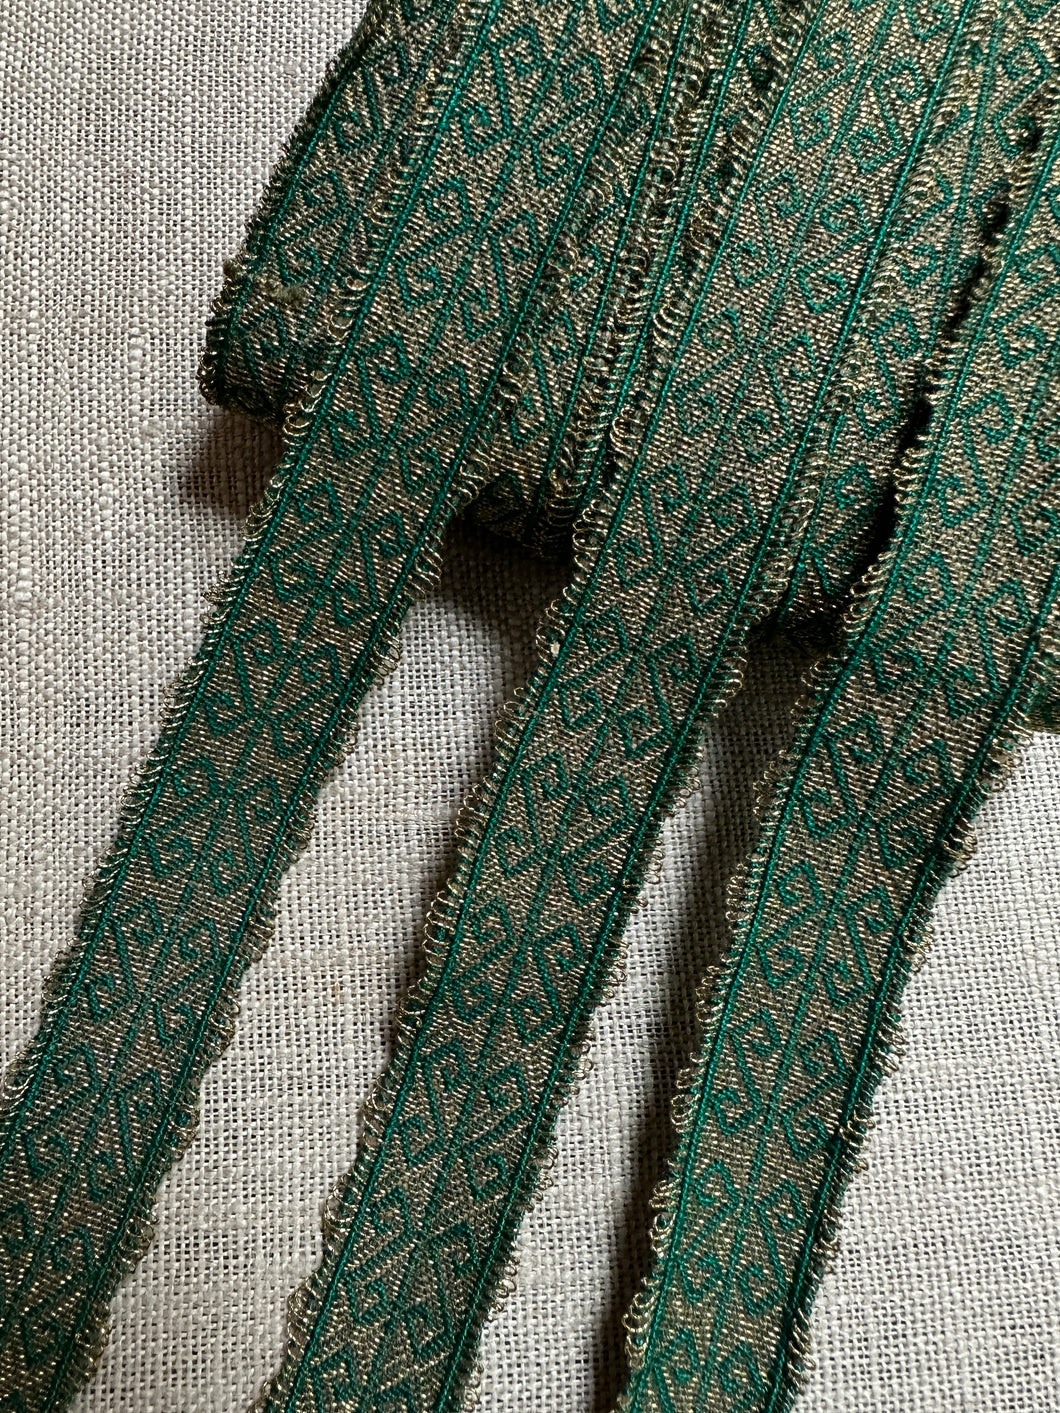 Copy of Antique Gold Metallic and Green Trim